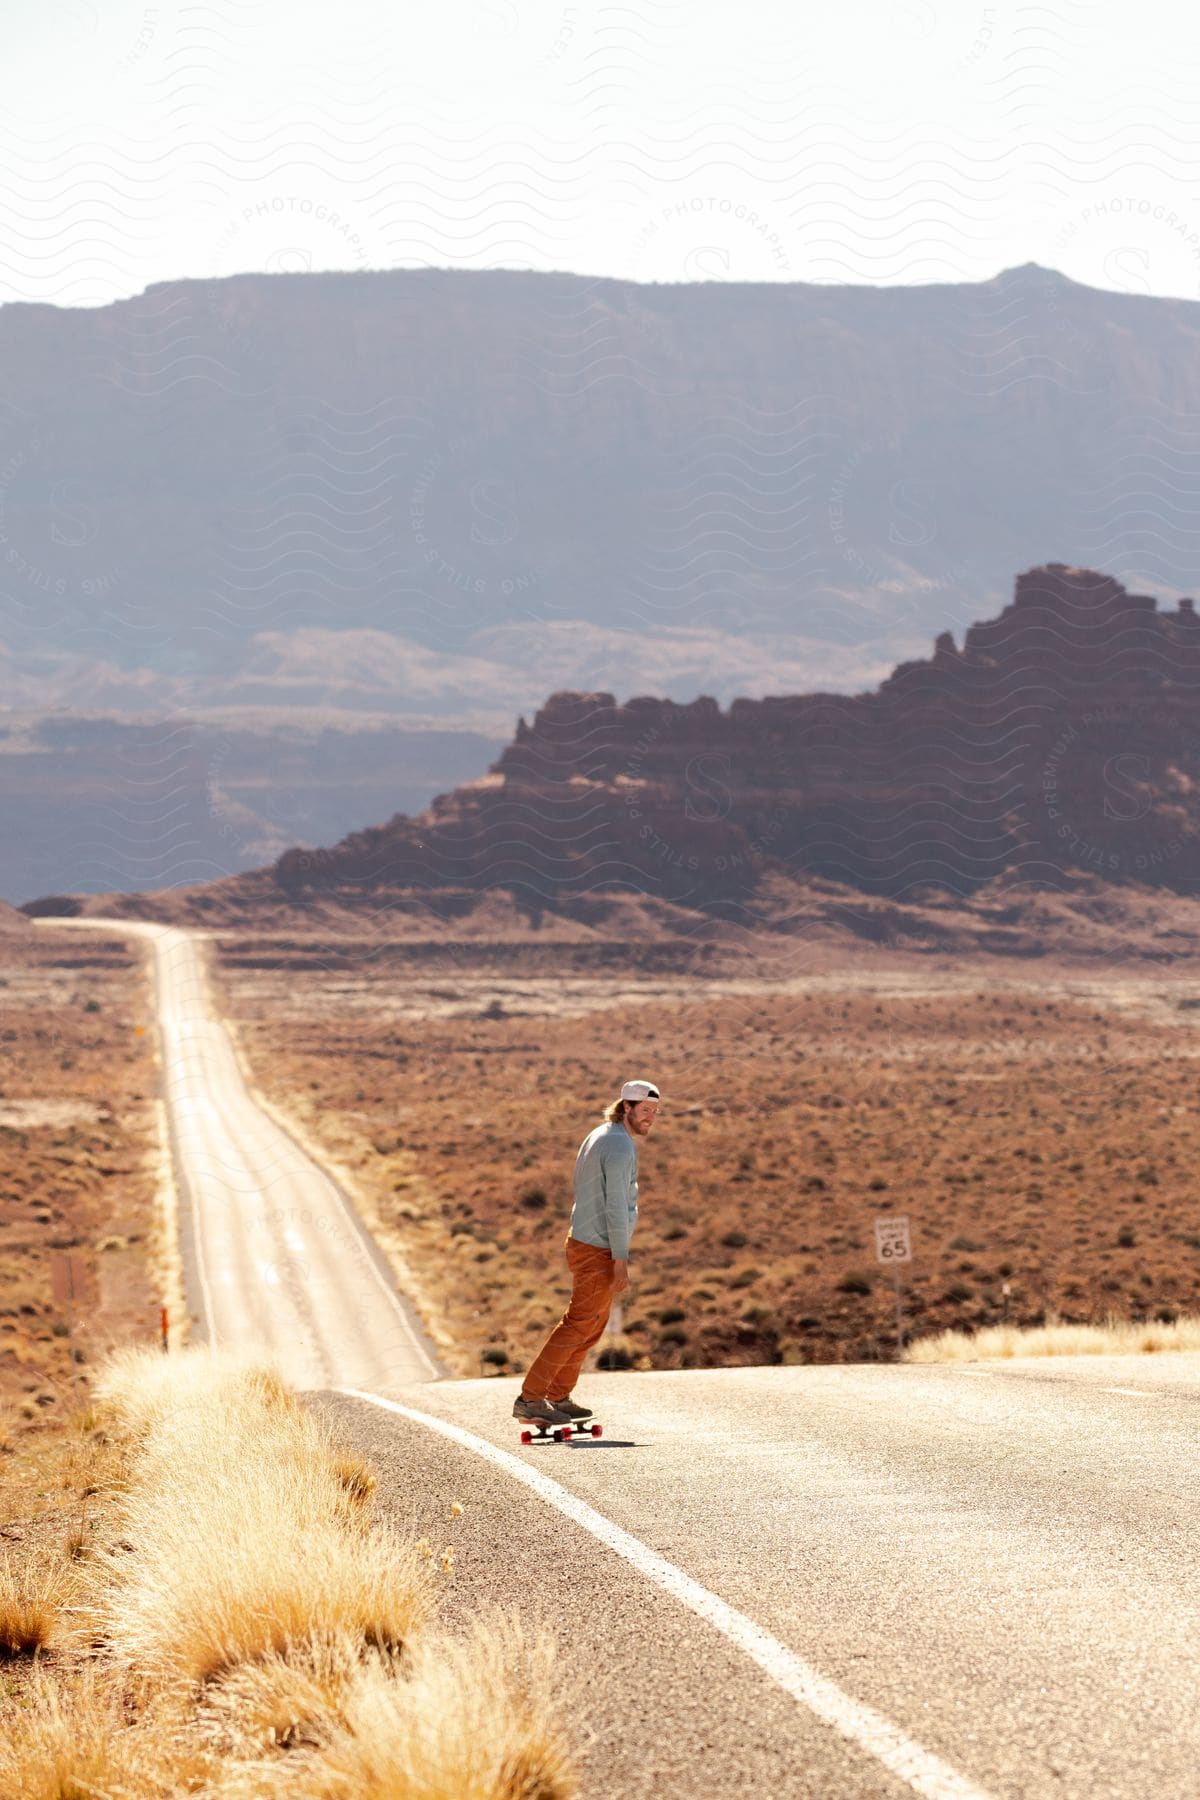 Man riding a skateboard up a hill on a rural road with mountains in the distance